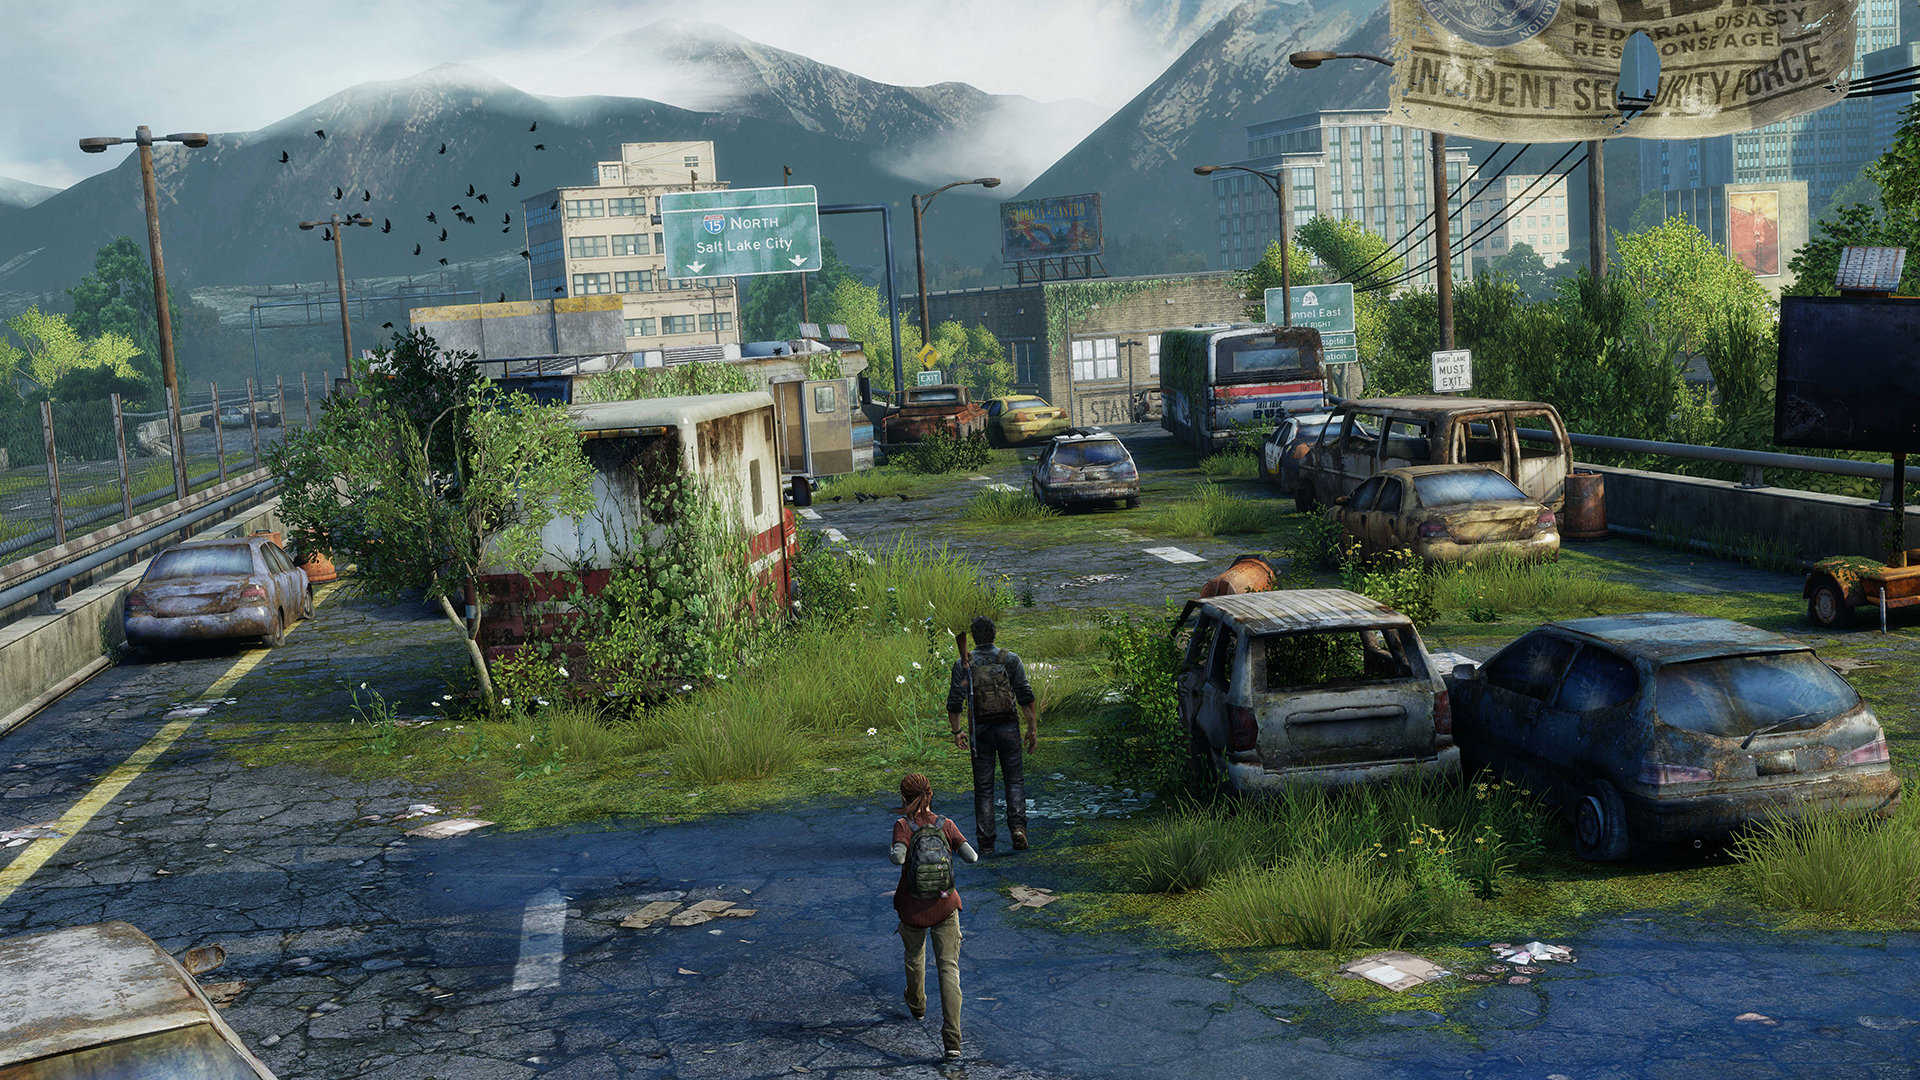 New to 'The Last of Us'? Here's What to Know Before It Debuts